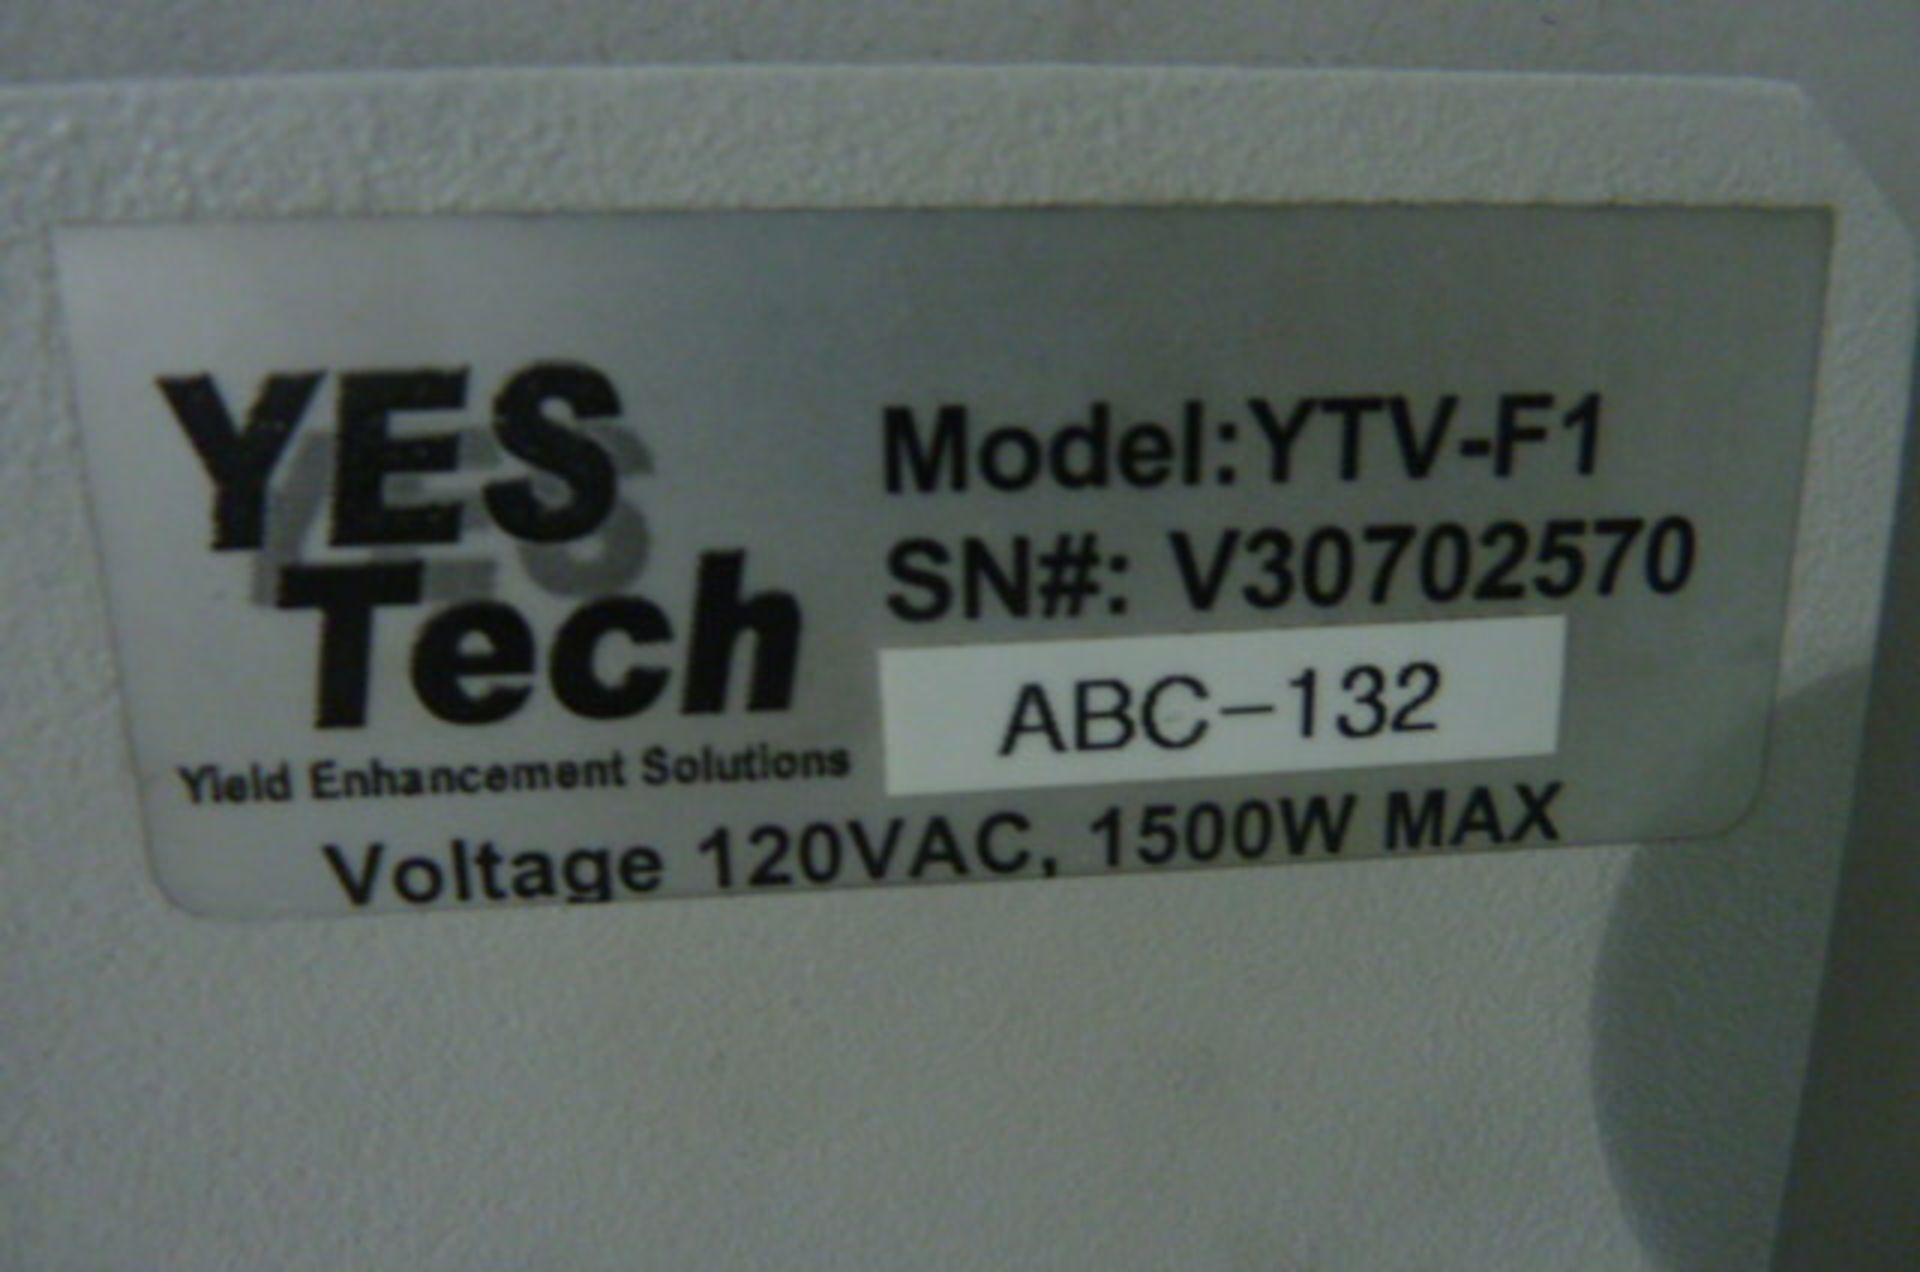 Yestech Md. YTV-F1 optical inspector with high TCHM mag., SN: V30702570 - Image 3 of 4